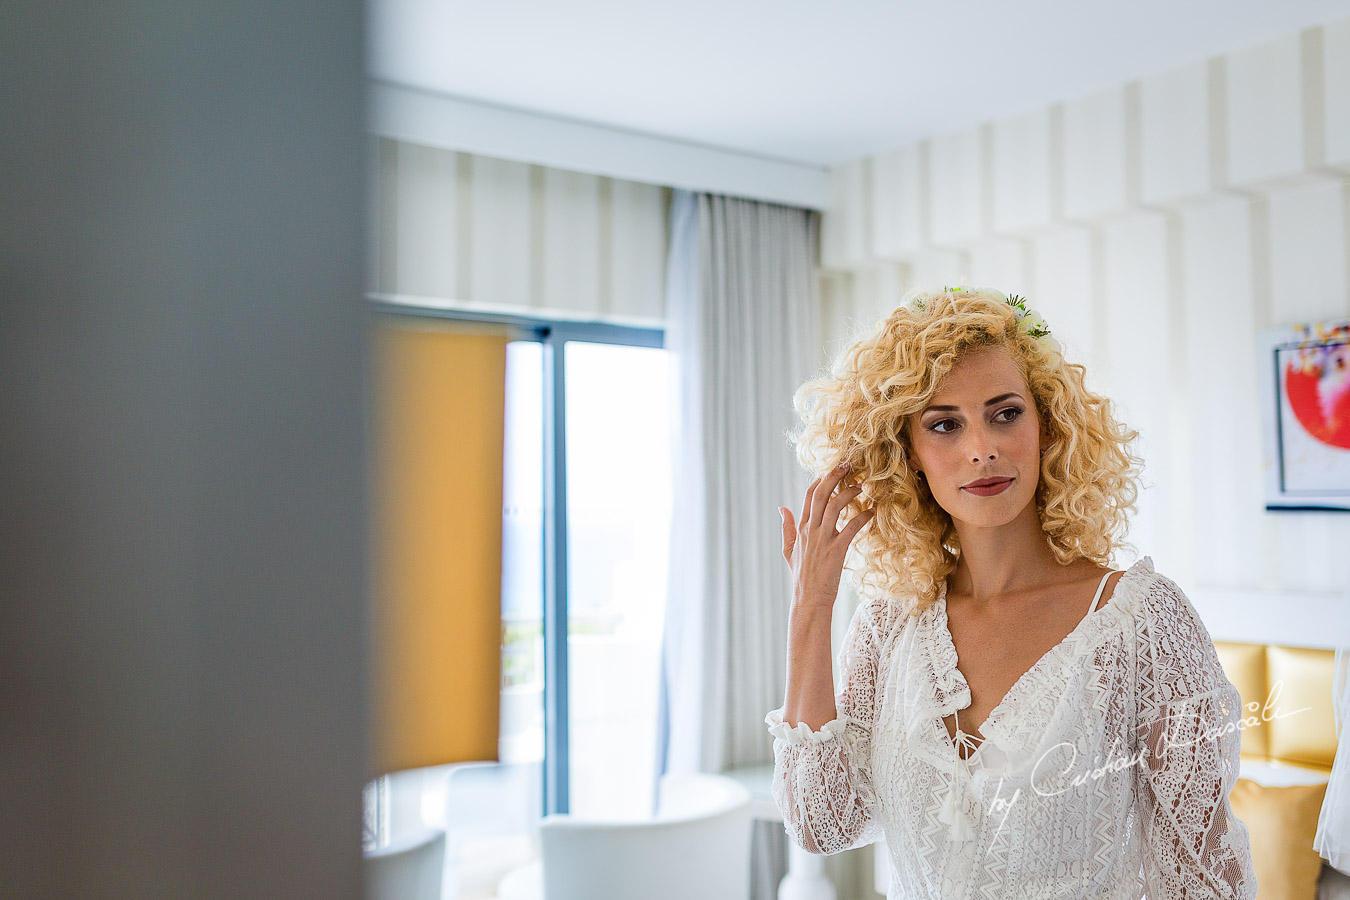 Bridal make-up moments captured before her Jewish Wedding Ceremony in Cyprus.